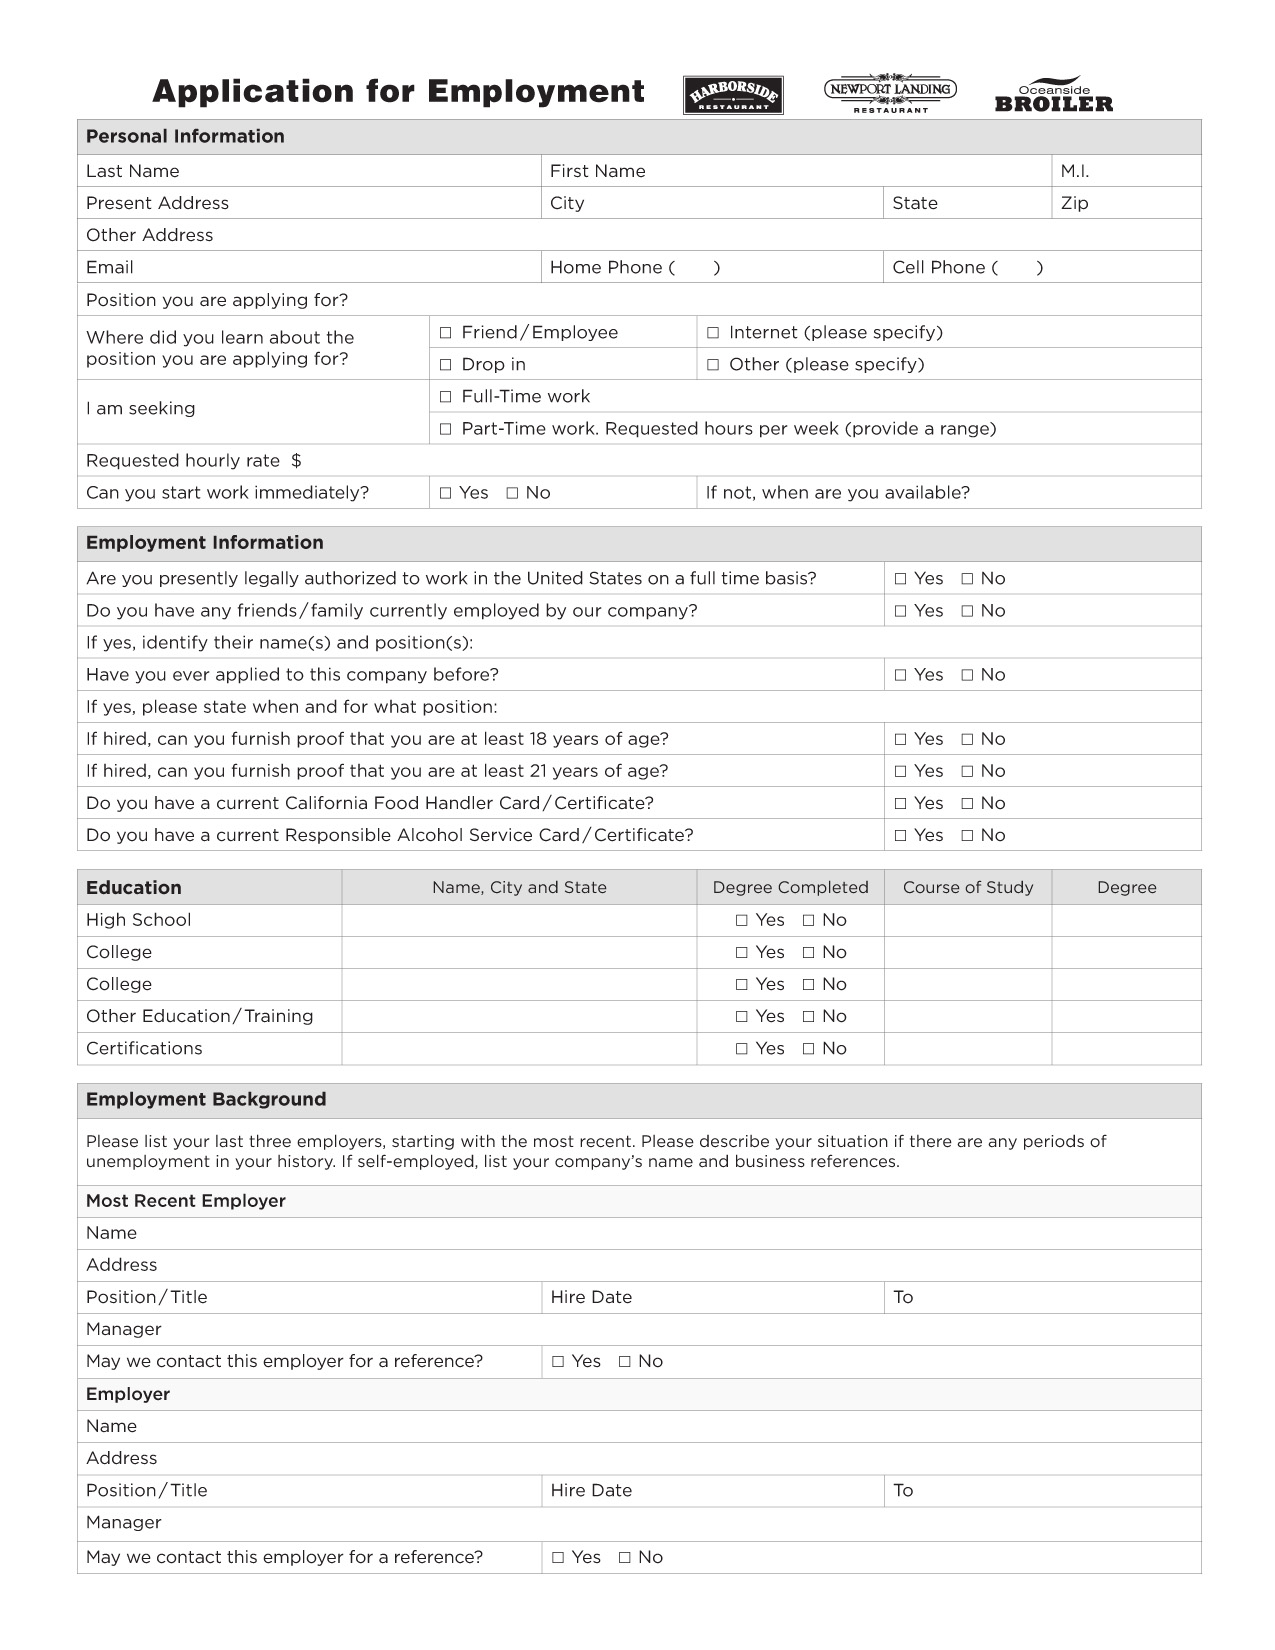 Employee Application Page 2